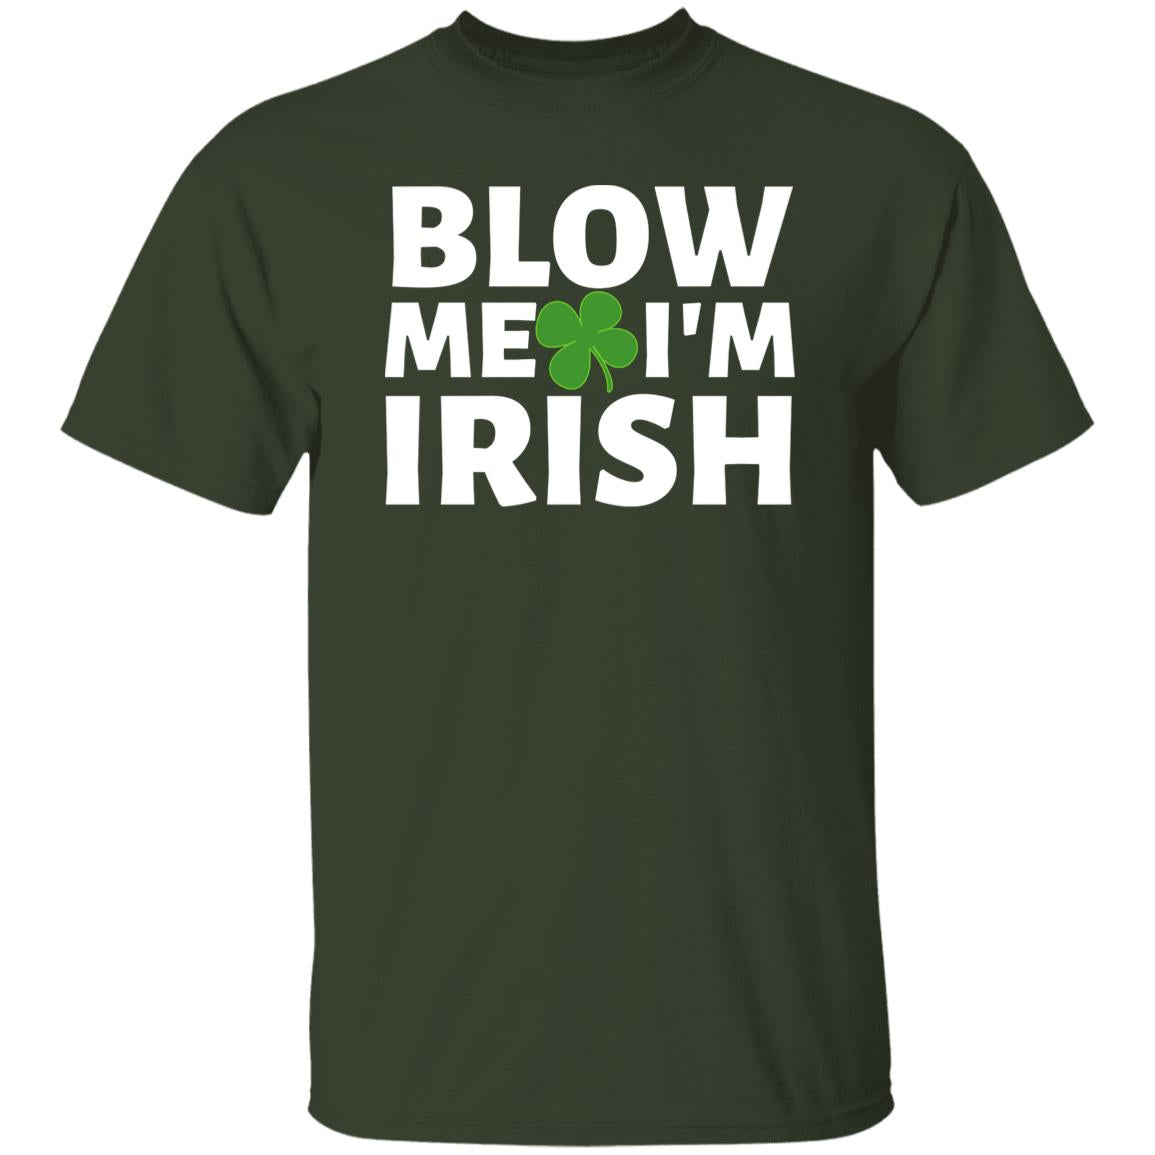 Blow Me I'm Irish Offensive St. Patrick's Day T-shirt, Funny St. Paddy's day Tshirt